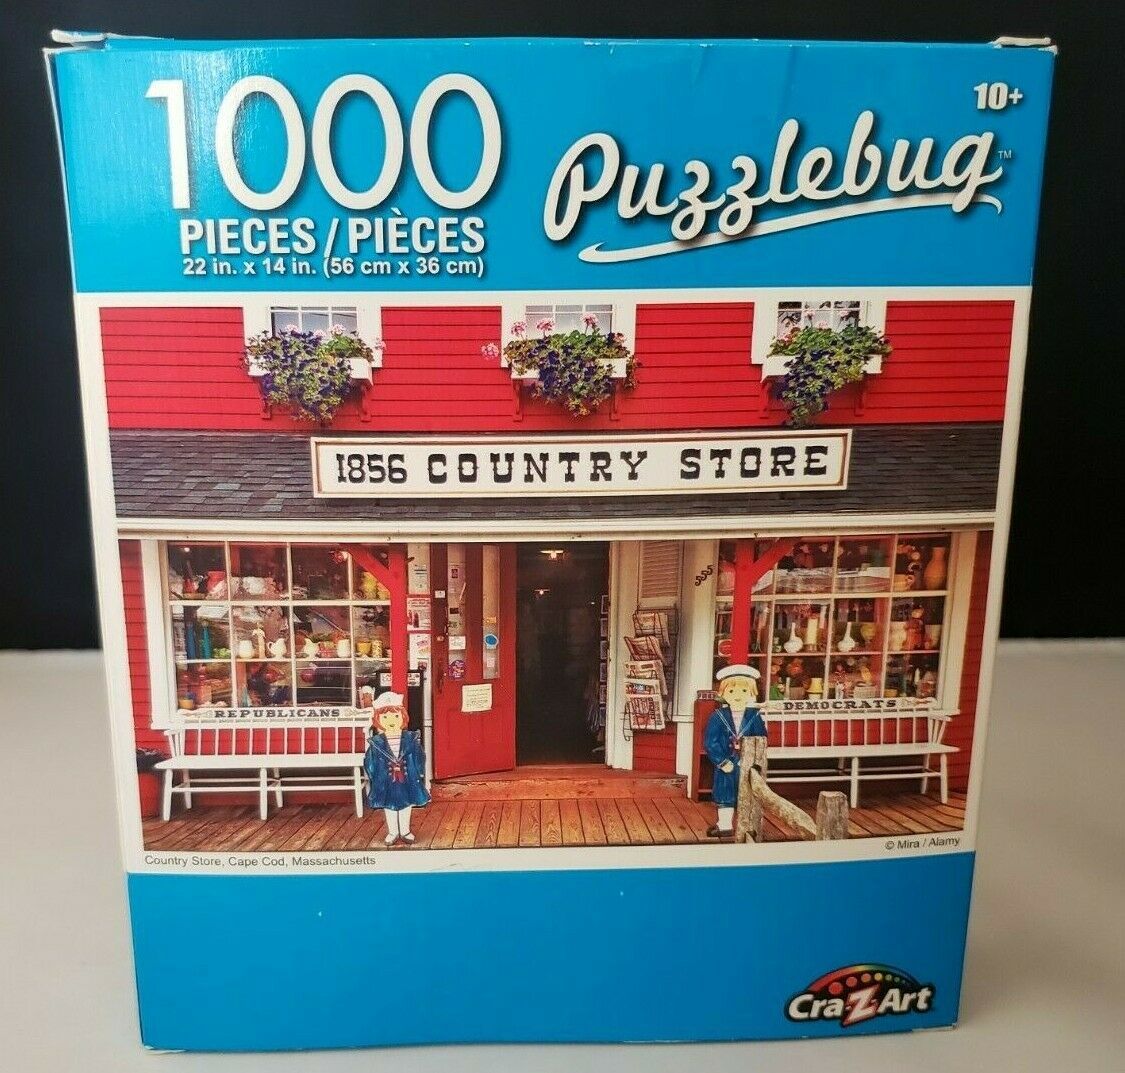 Primary image for Puzzlebug New 1000 Piece Jigsaw Puzzle Country Store Cape Code, Massachusetts